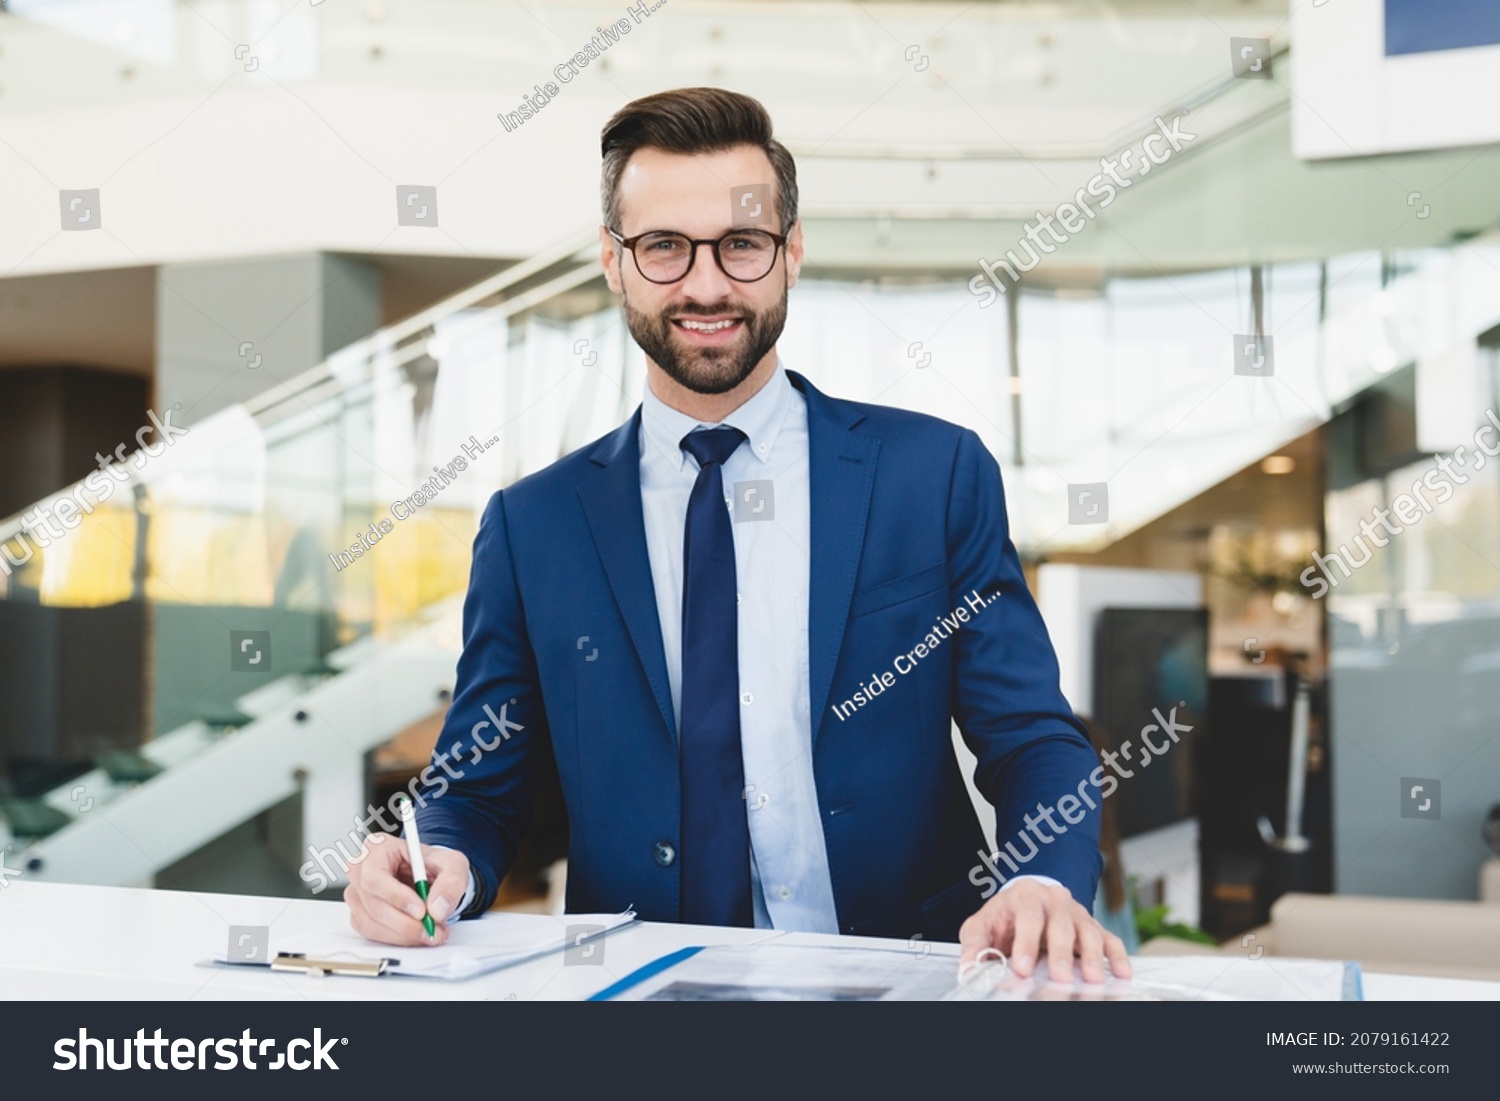 Successful caucasian smiling man shop assistant receptionist in formal attire writing looking at camera while standing at reception desk in hotel car dealer shop #2079161422